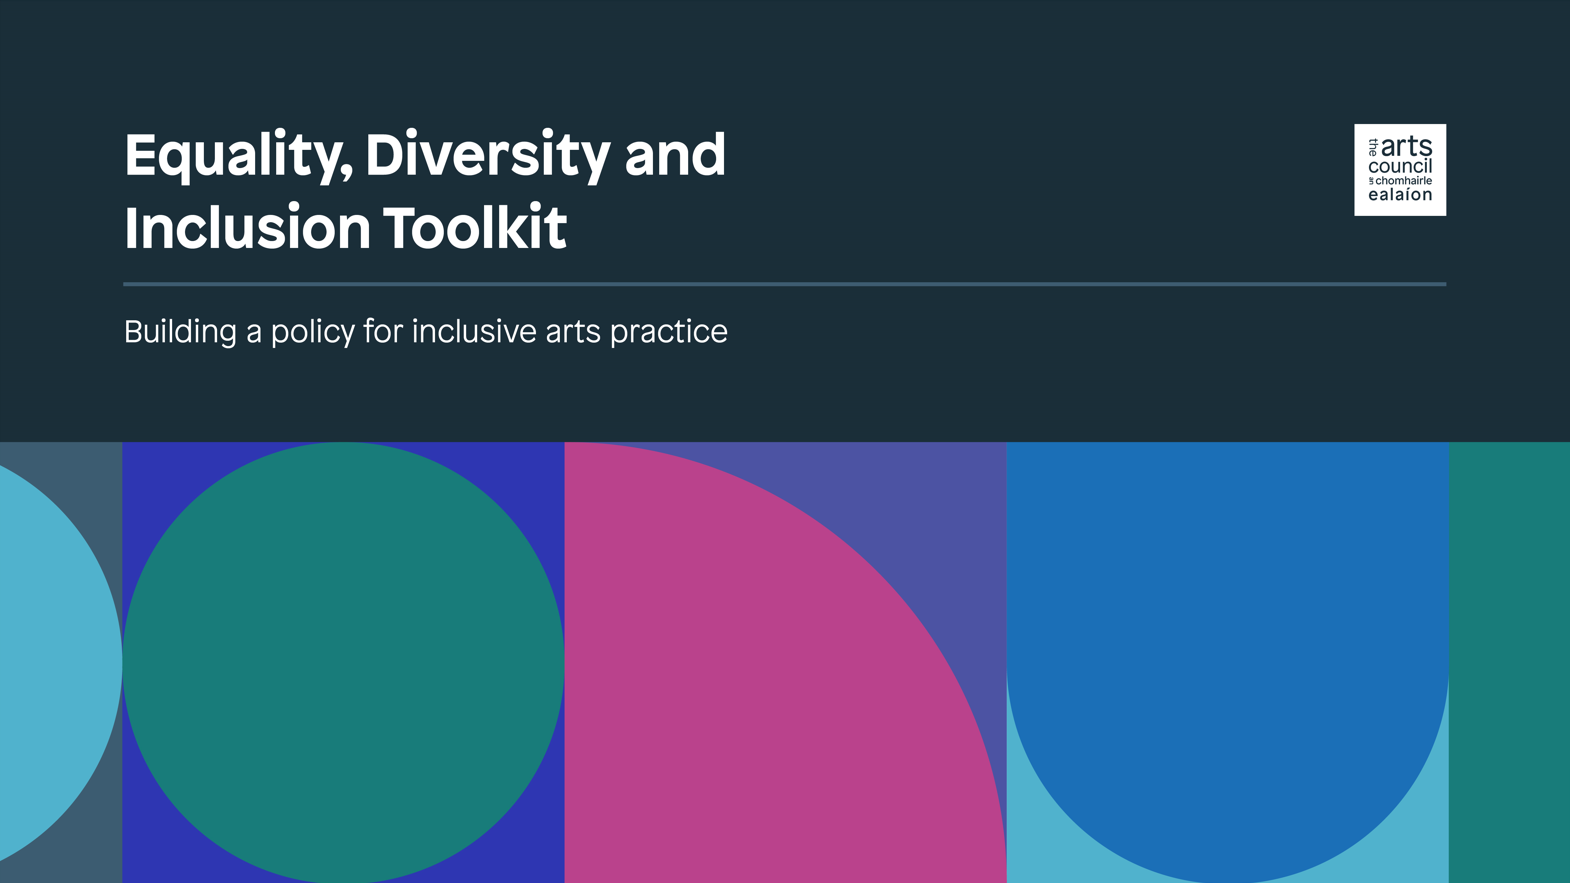 Click to access the full Equality, Diversity and Inclusion Toolkit